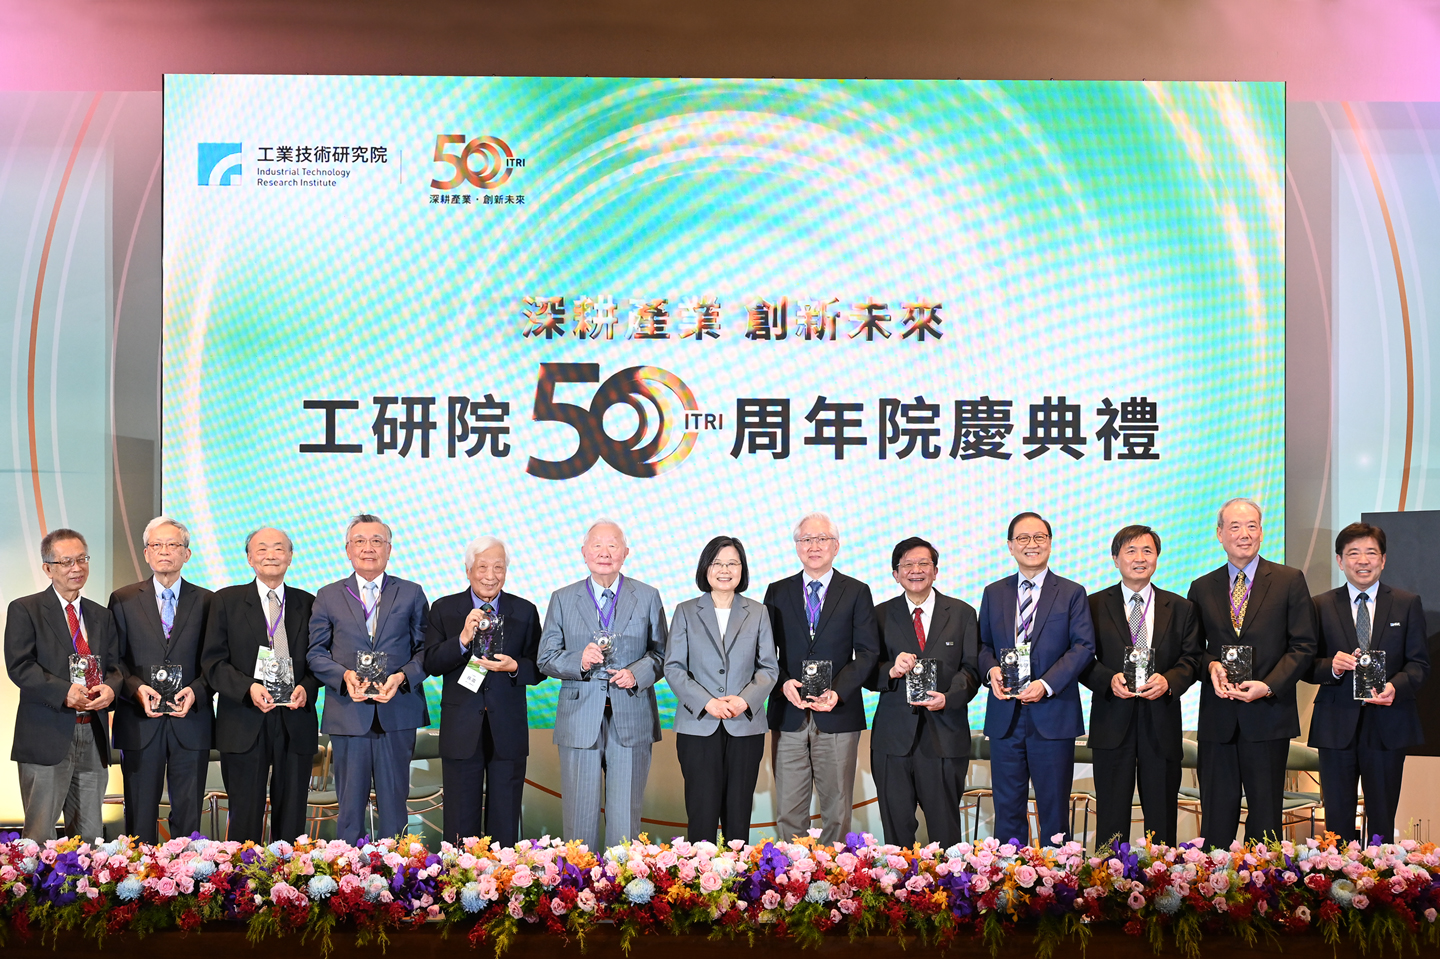 At the golden jubilee ceremony, President Tsai Ing-wen presented commemorative trophies to the Chairmen and Presidents of ITRI as a token of appreciation for their dedication over the years.